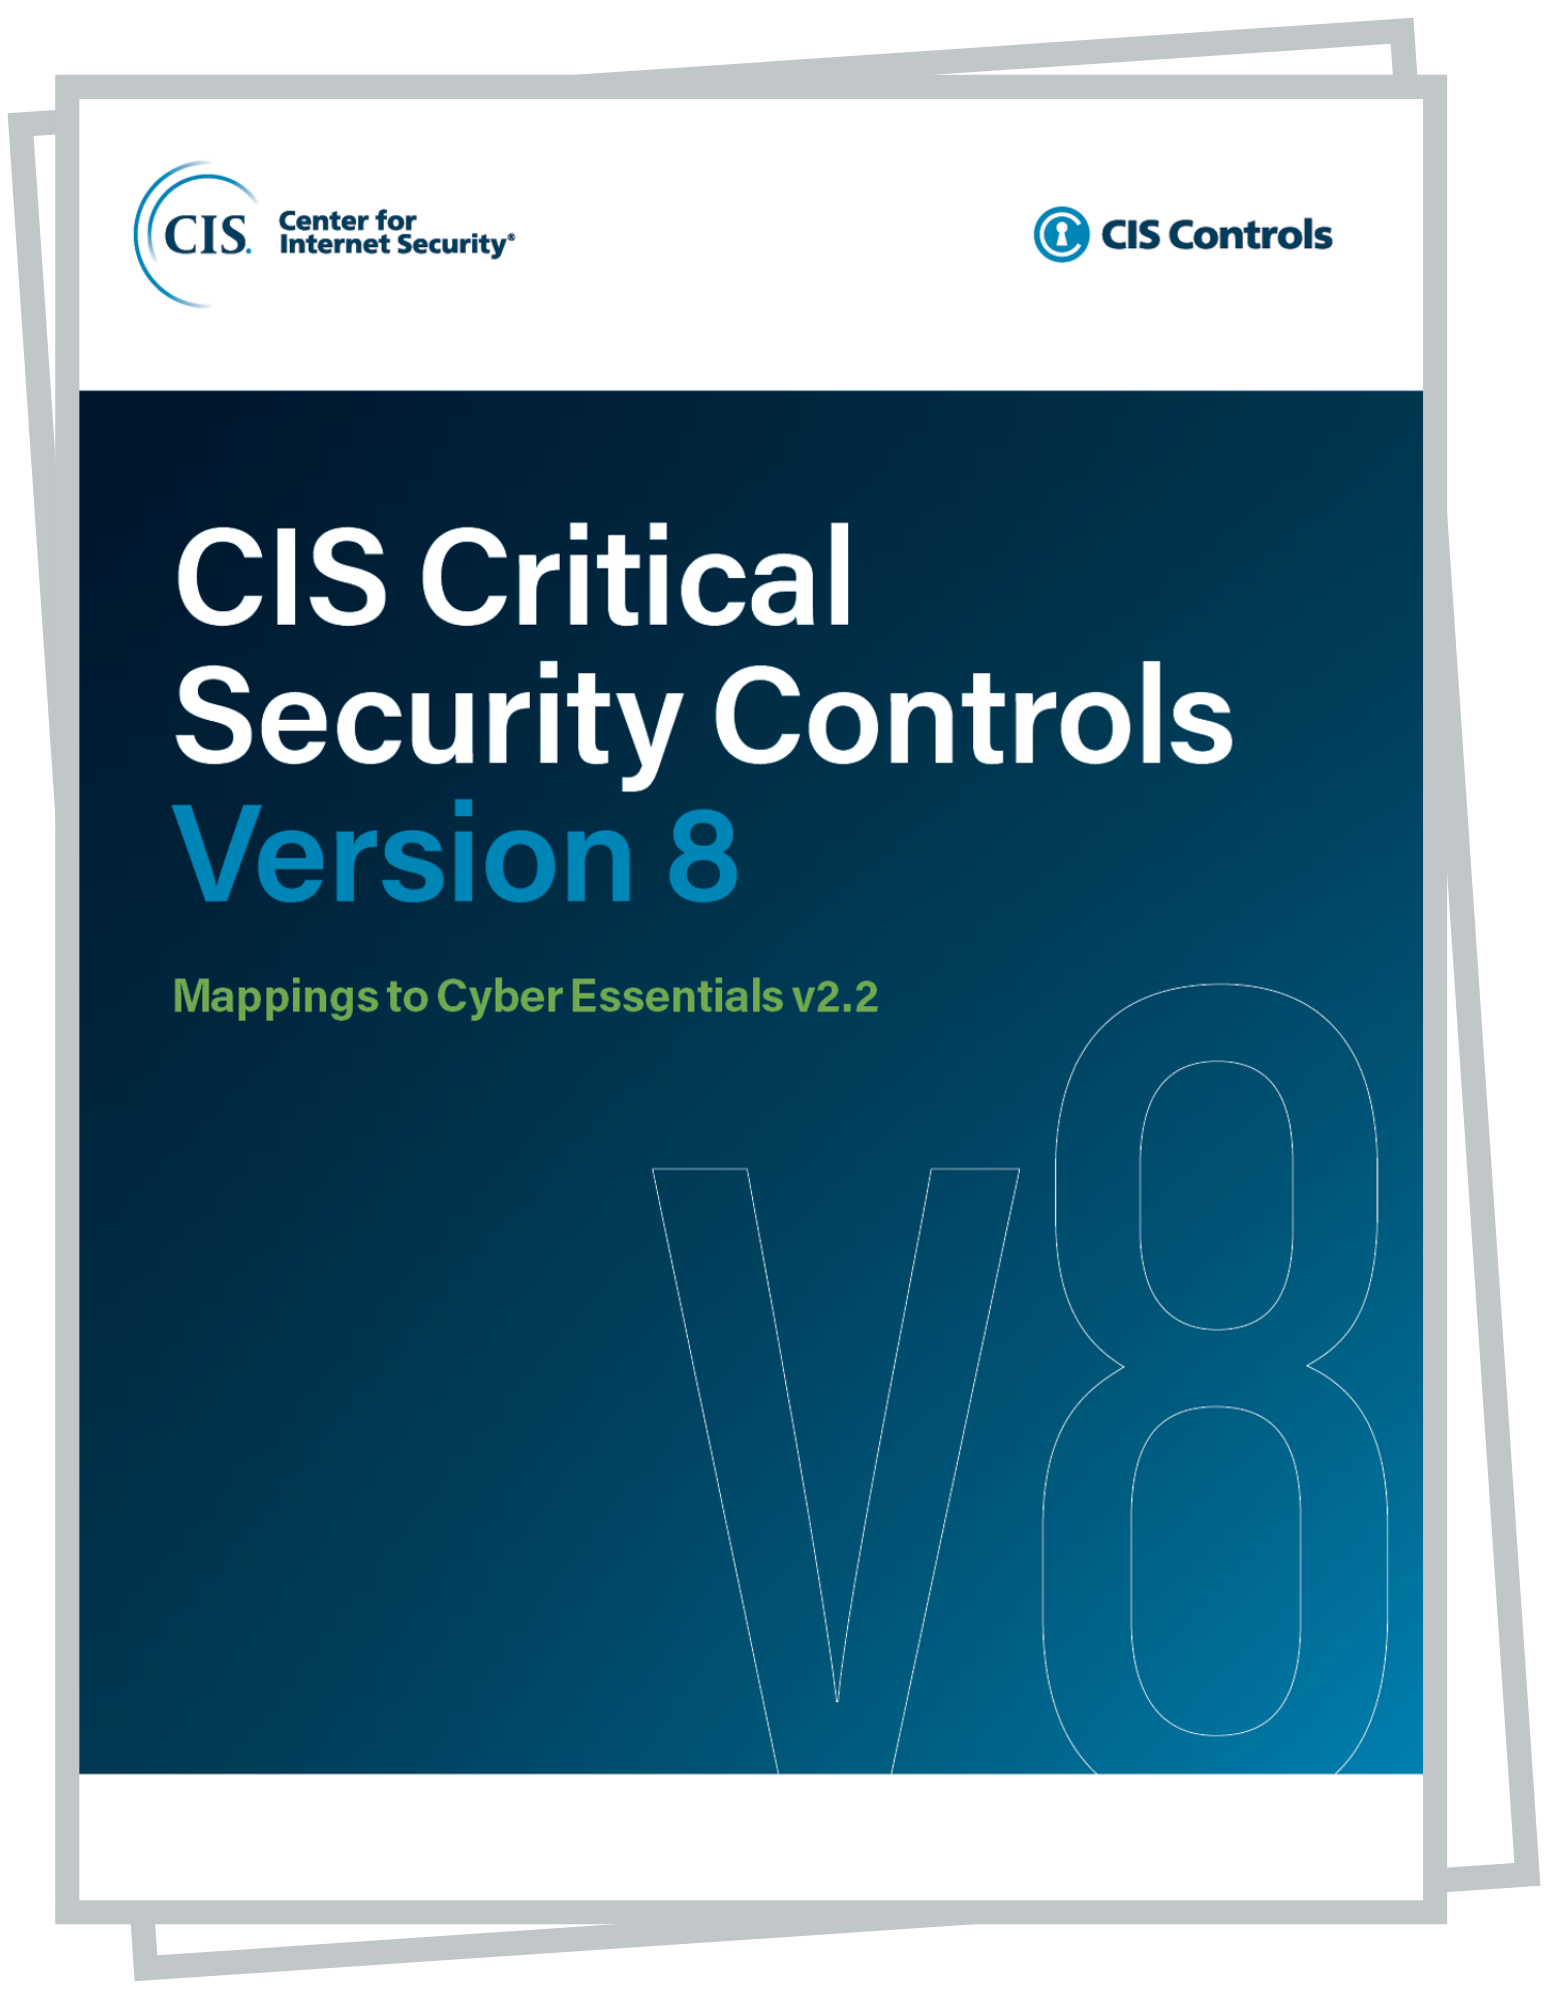 CIS-Controls-v8-Mappings-To-ISO-IEC-27002:2002